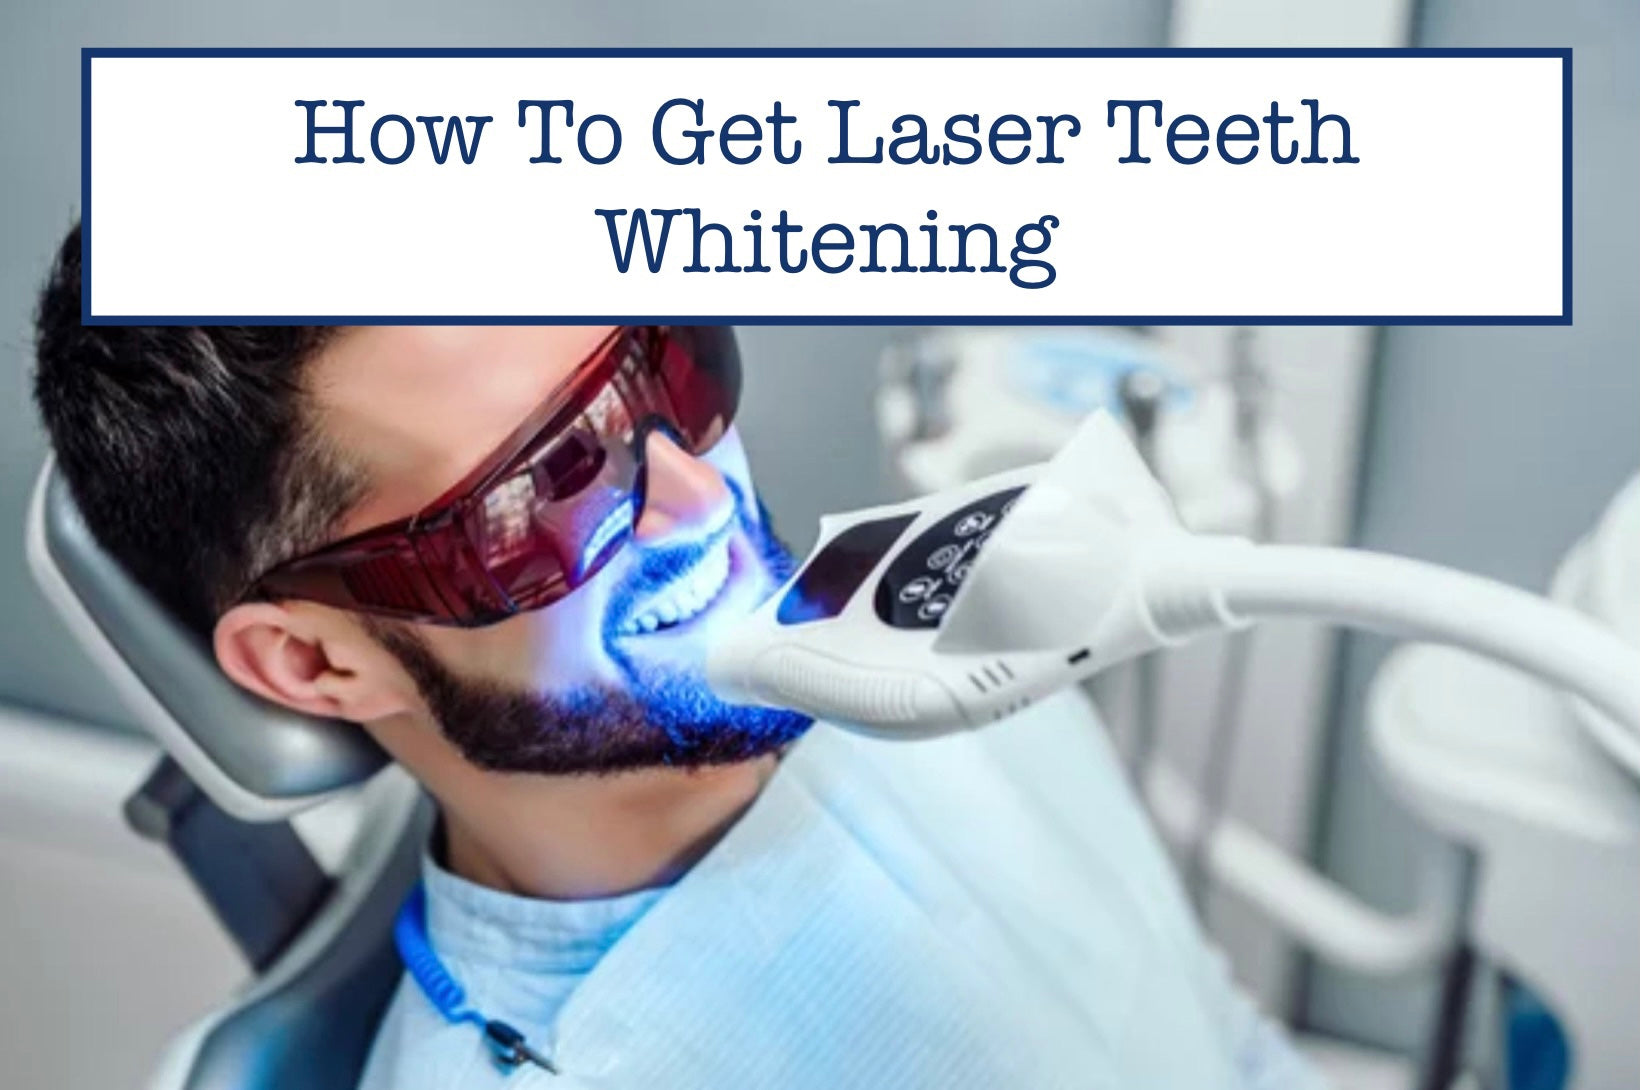 How To Get Laser Teeth Whitening